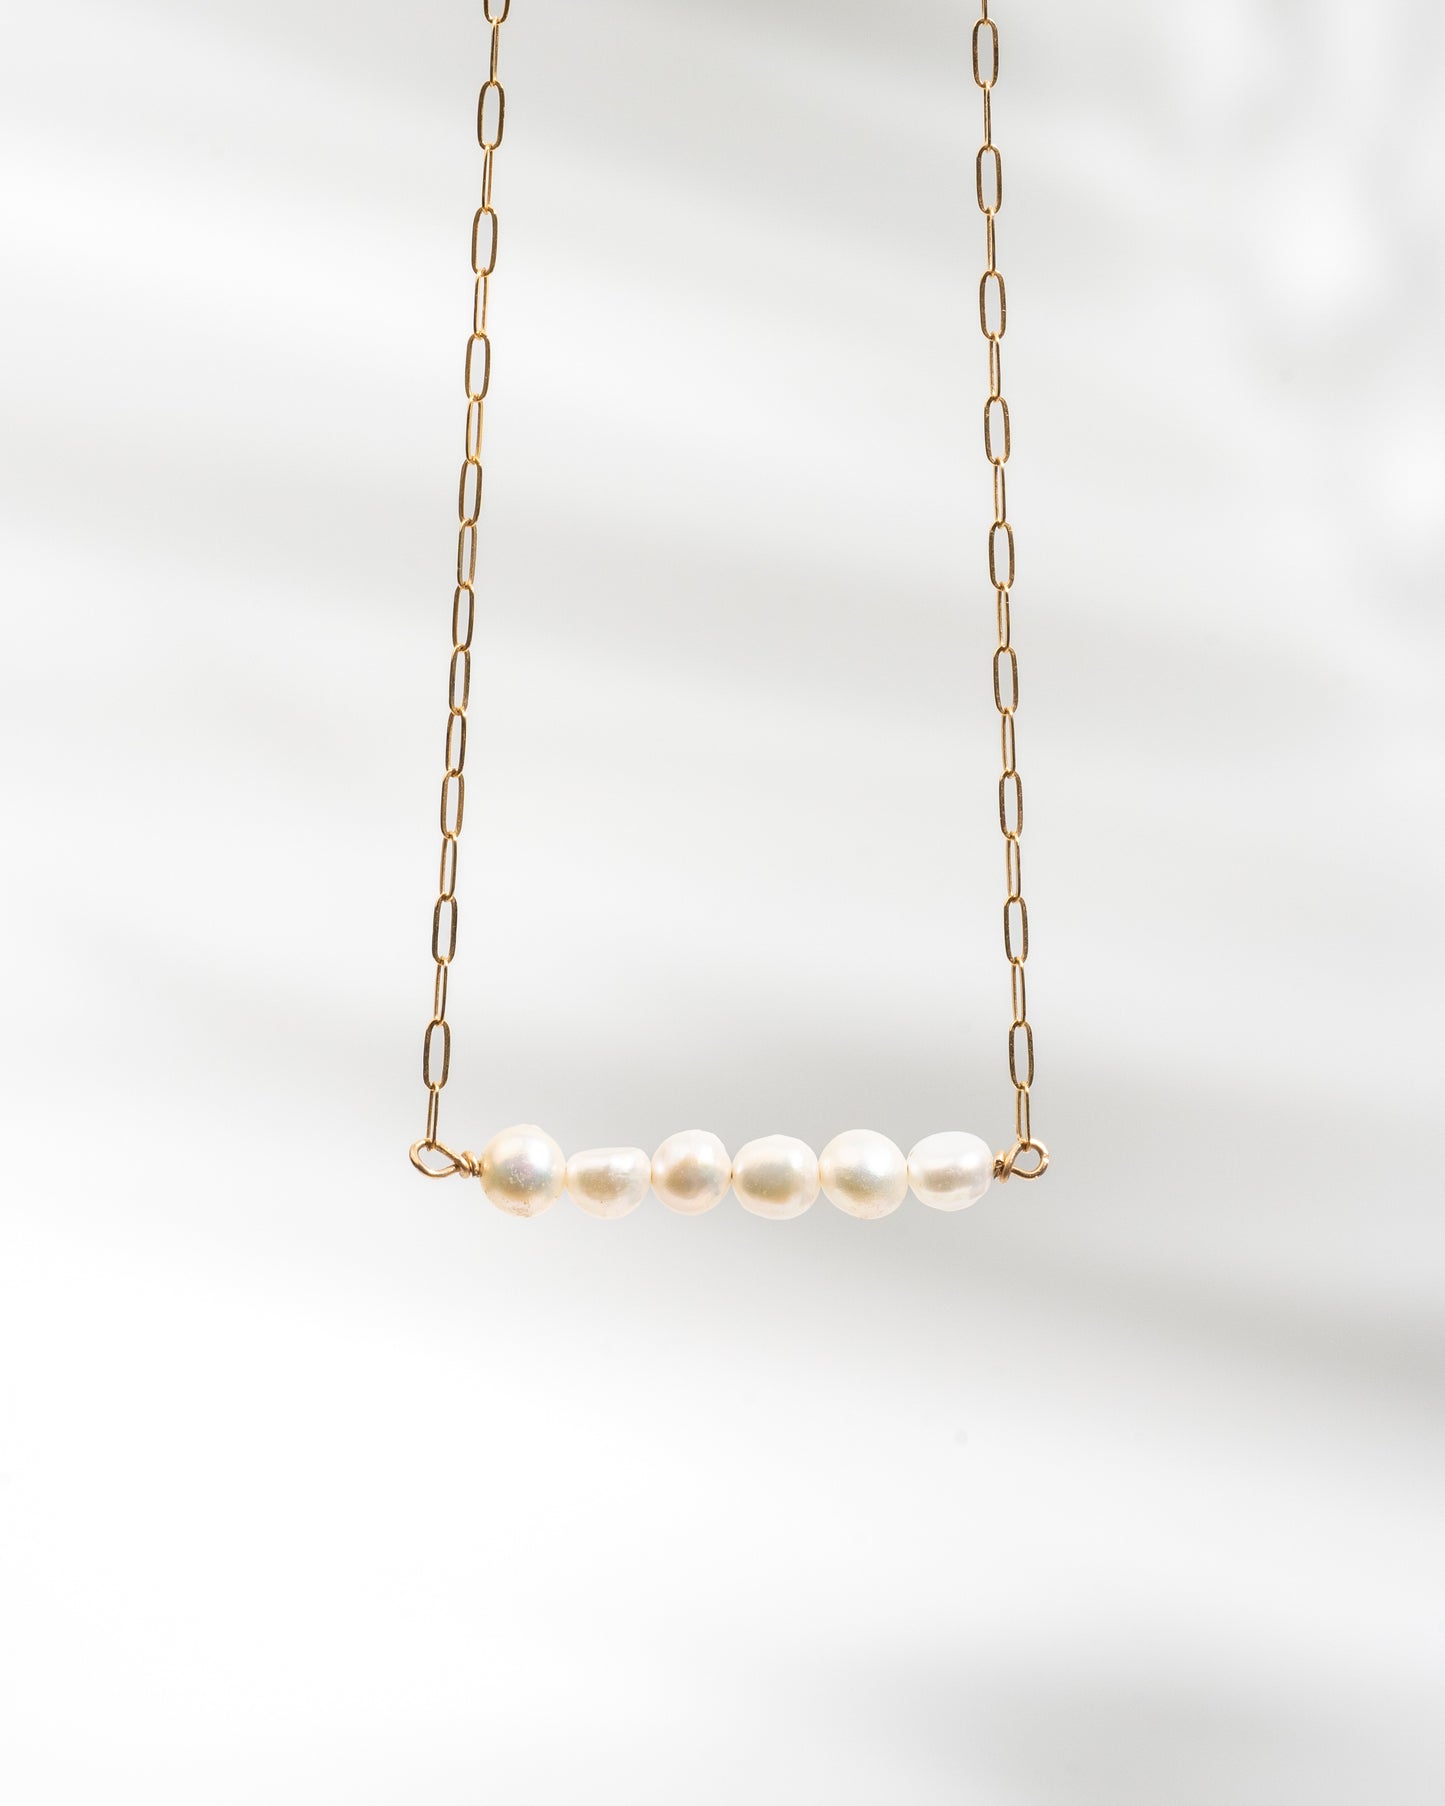 Tranquil Waters Necklace- Waterproof Pearl Bar Necklace in 14K Gold Fill